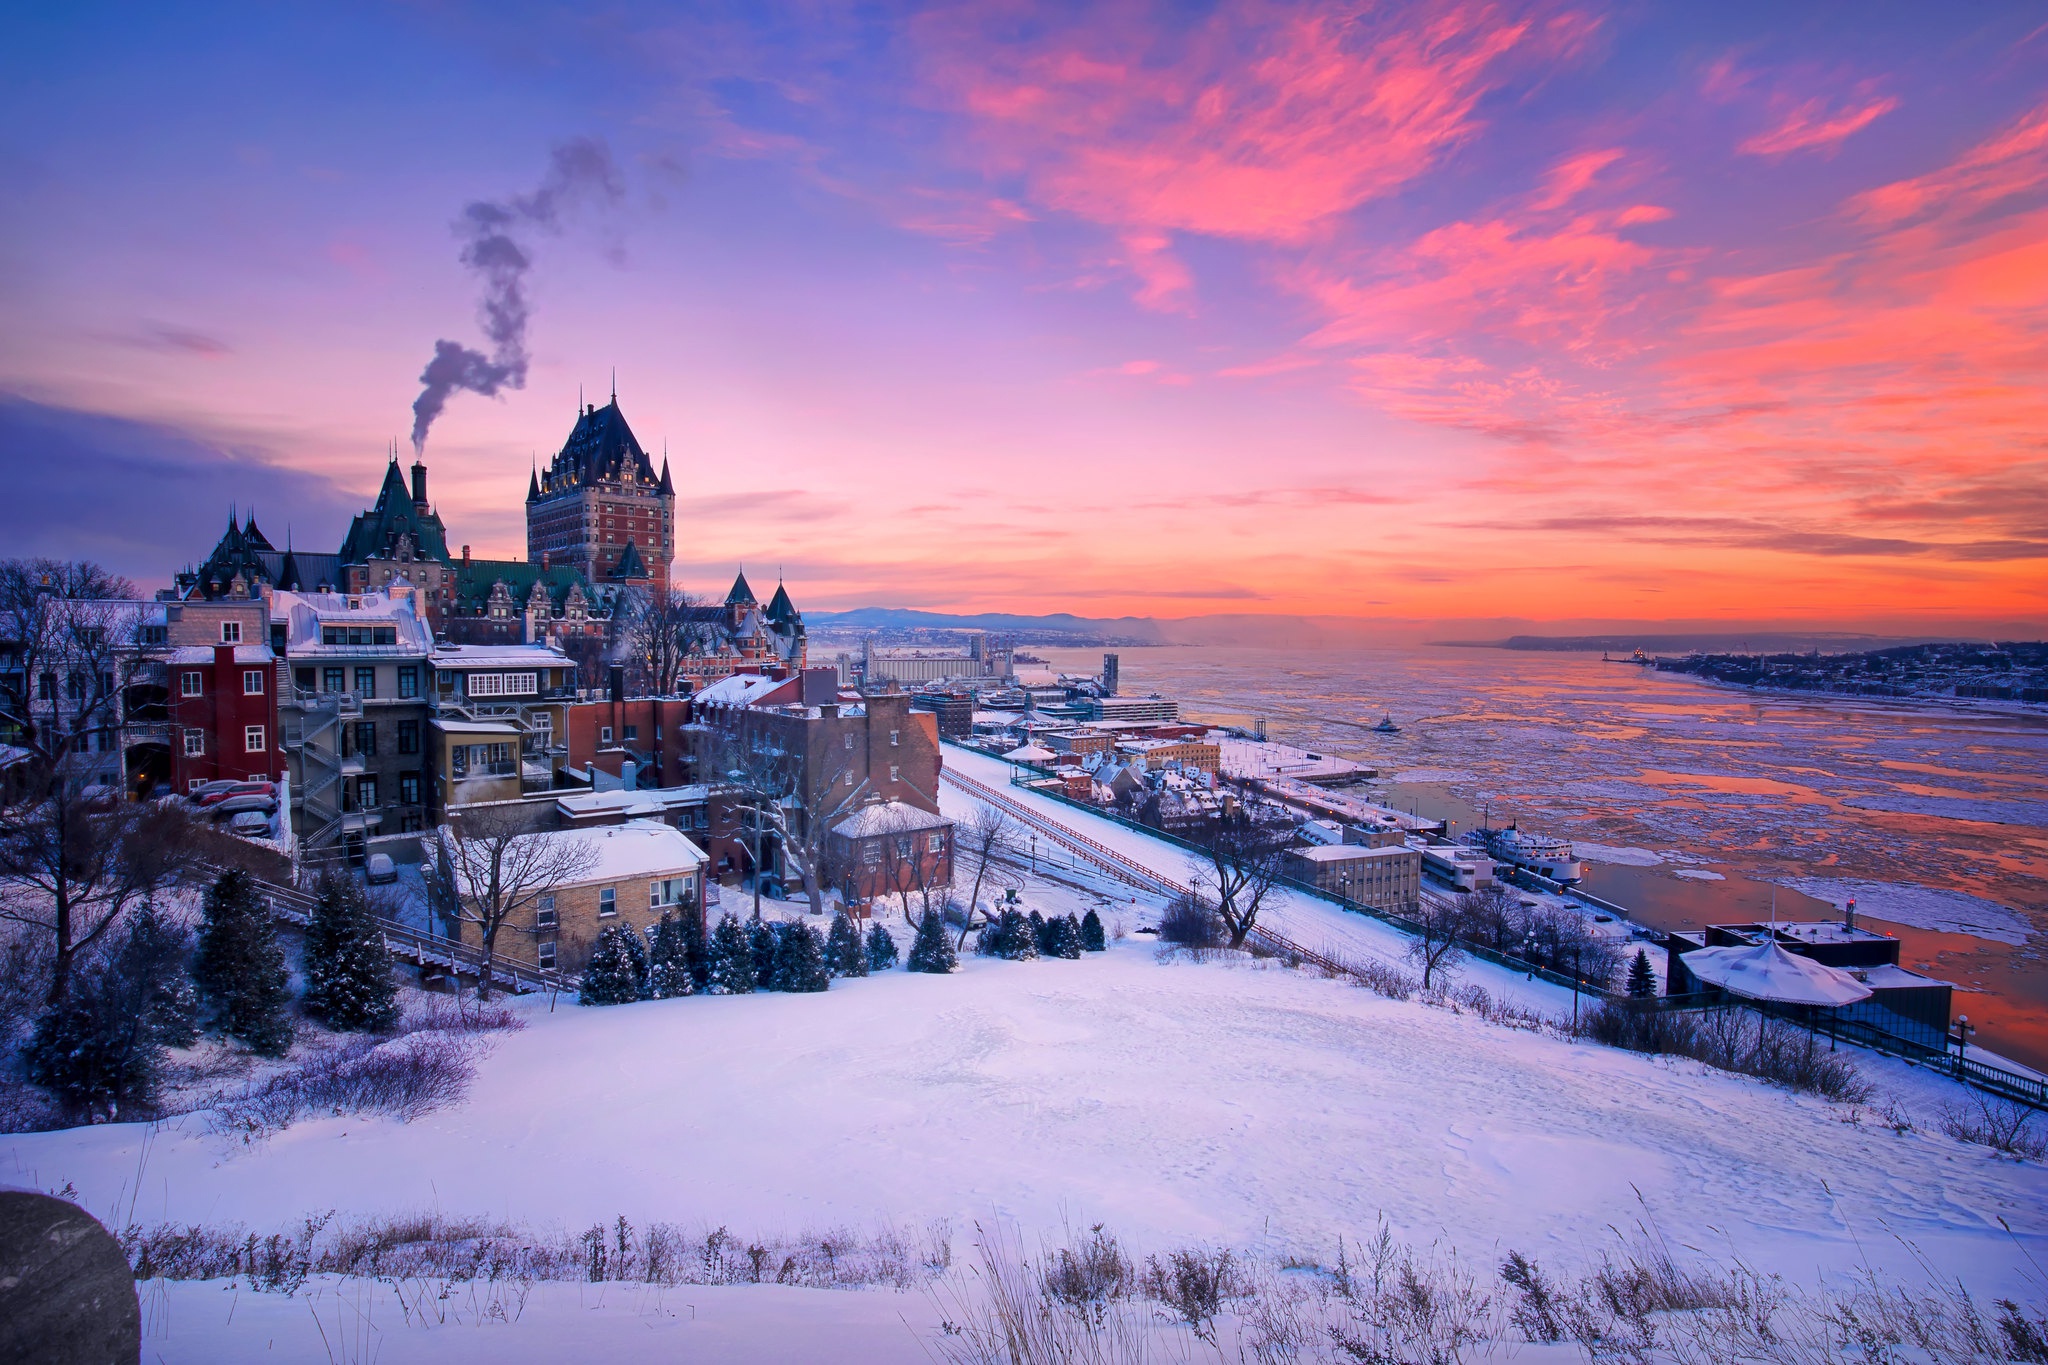 General 2048x1365 winter cold sky Château Frontenac